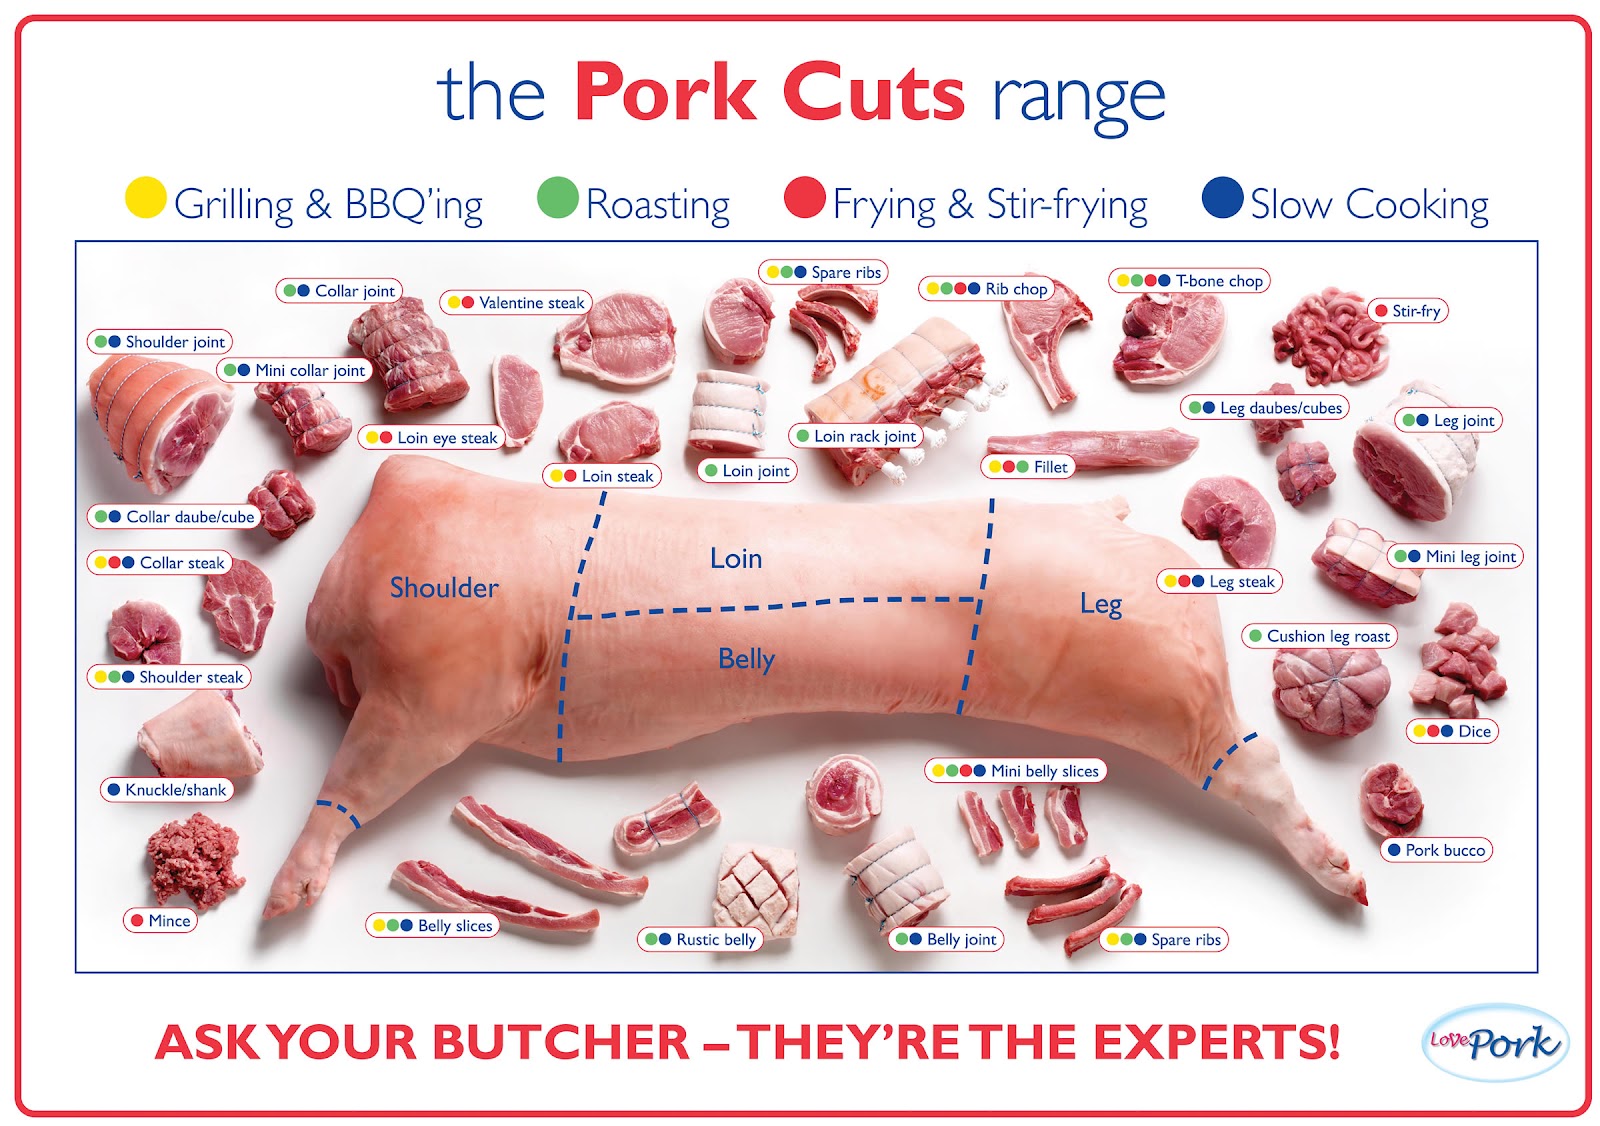 DIFFERENT CUTS OF MEAT